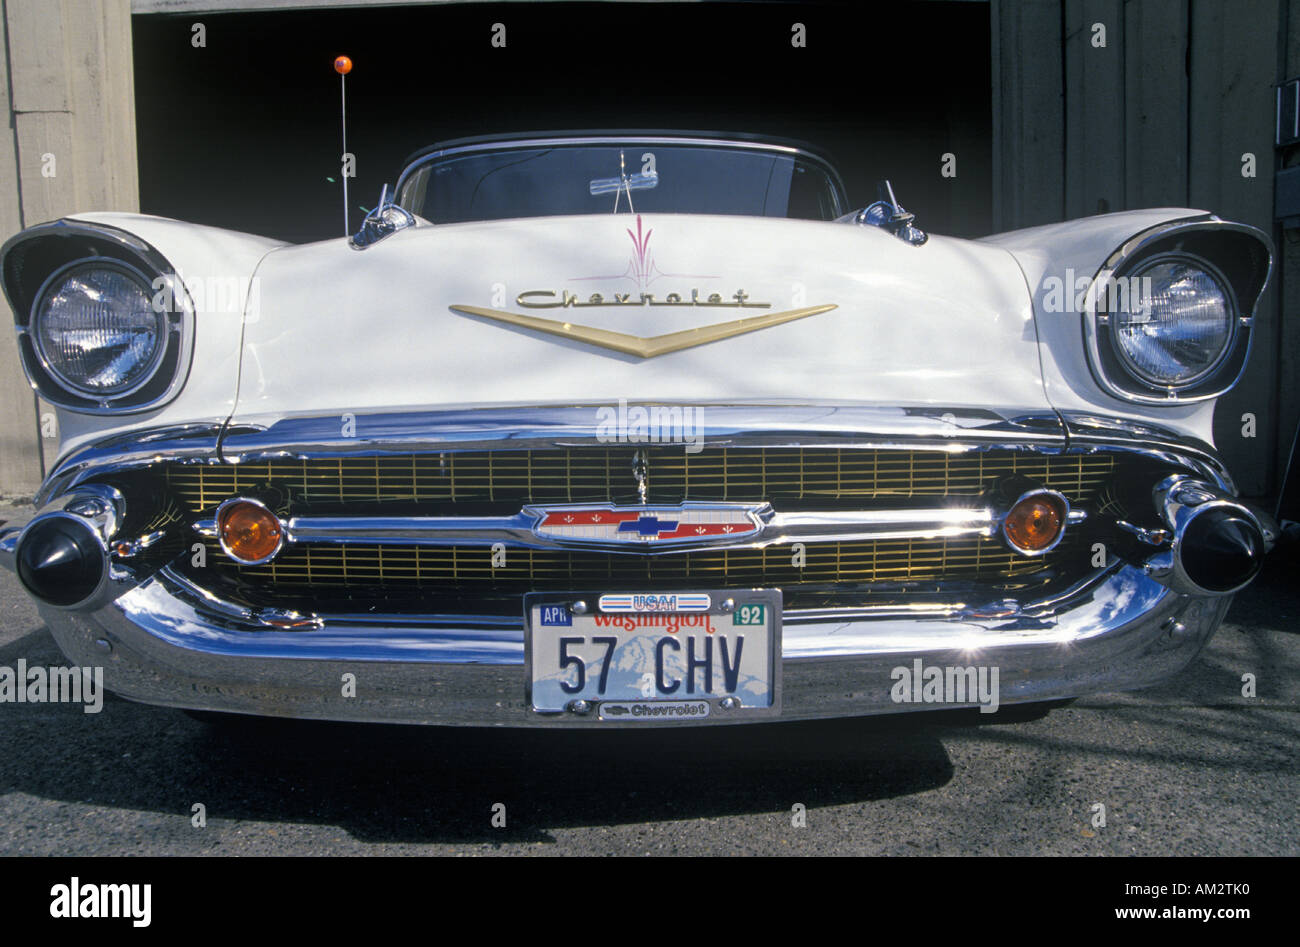 A white 1957 Chevrolet convertible with a Washington license plate reading 57 CHV Stock Photo